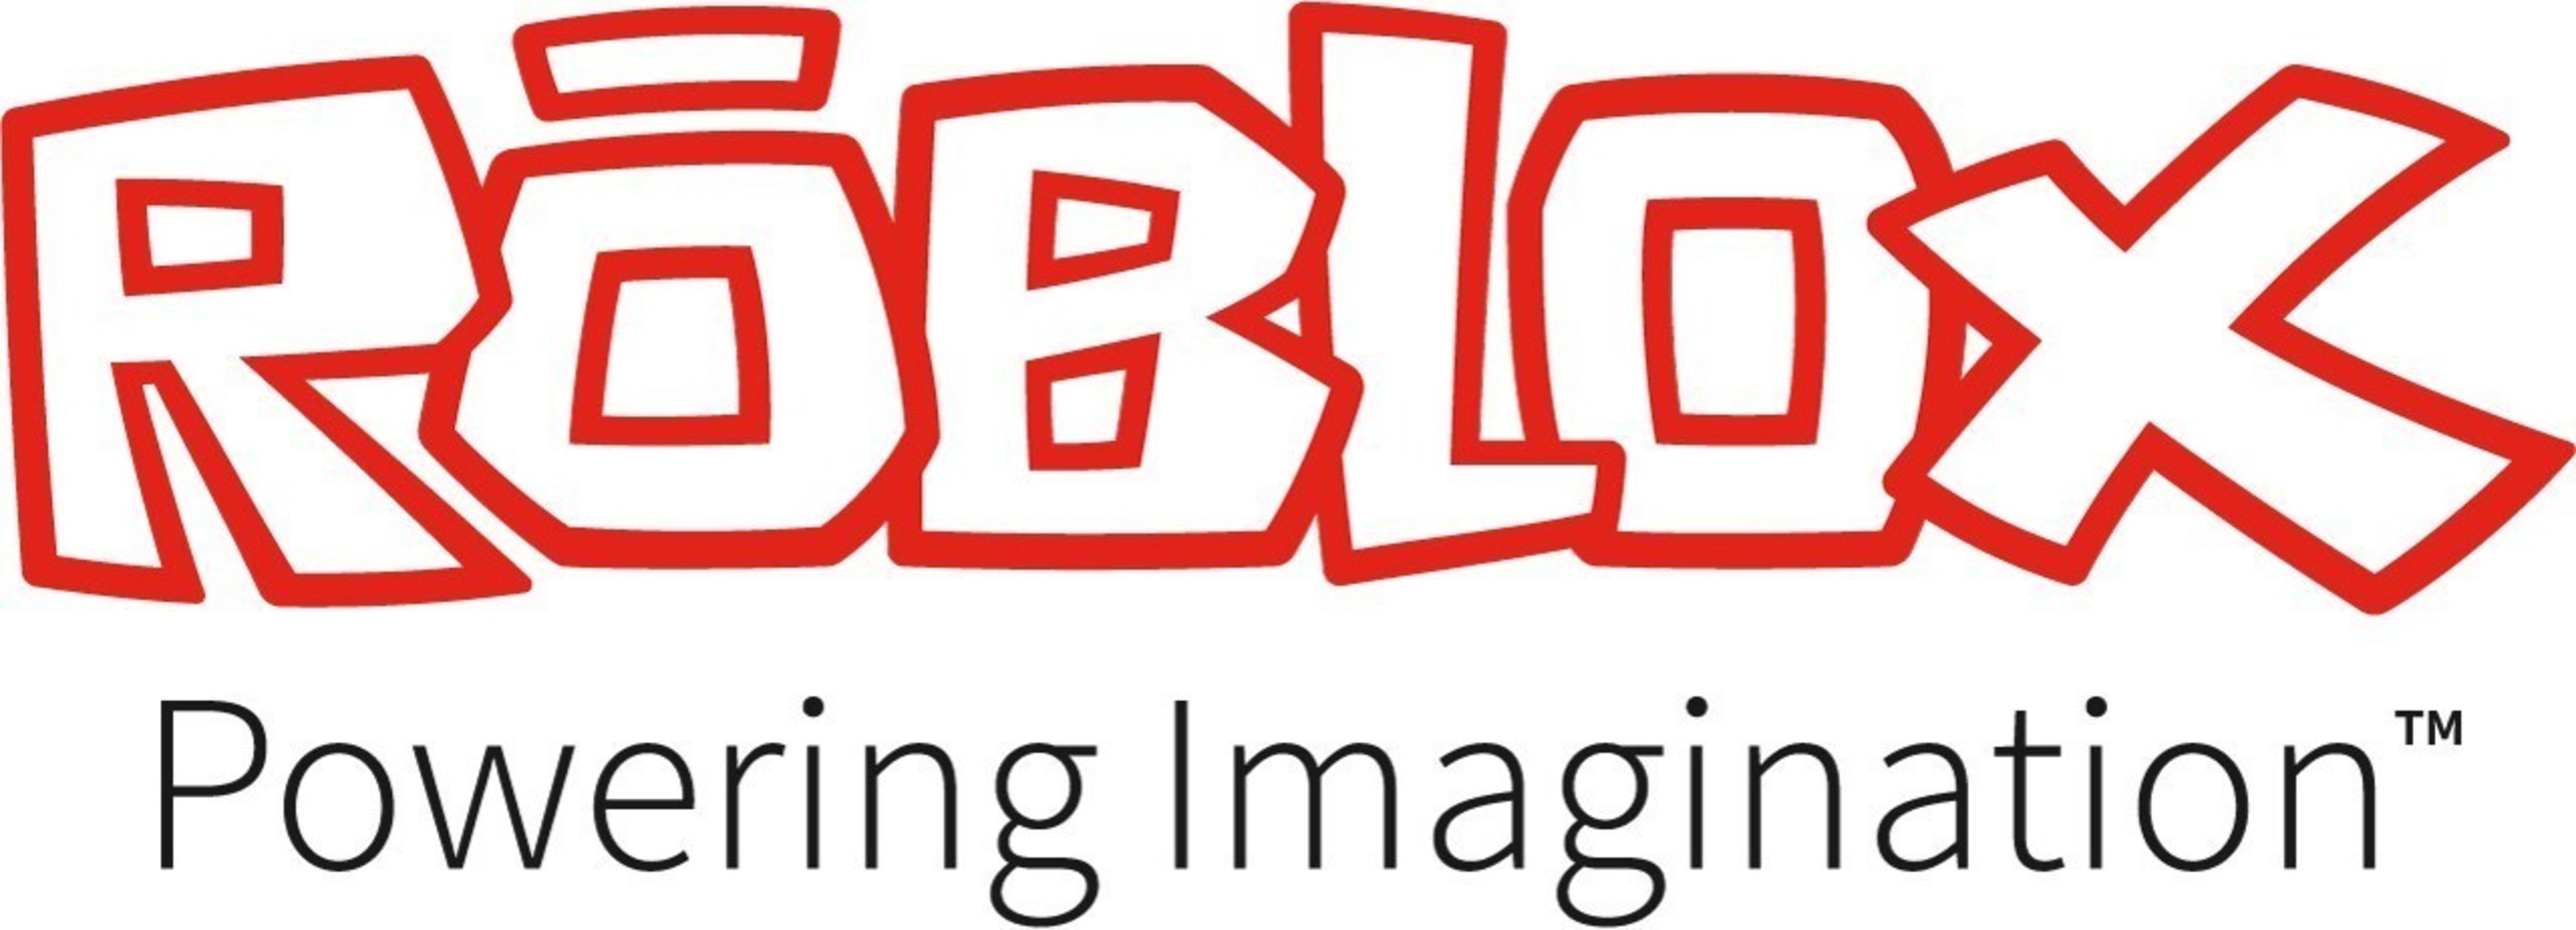 Roblox Expands Powering Imagination Vision By Launching Cross Platform On Oculus Rift